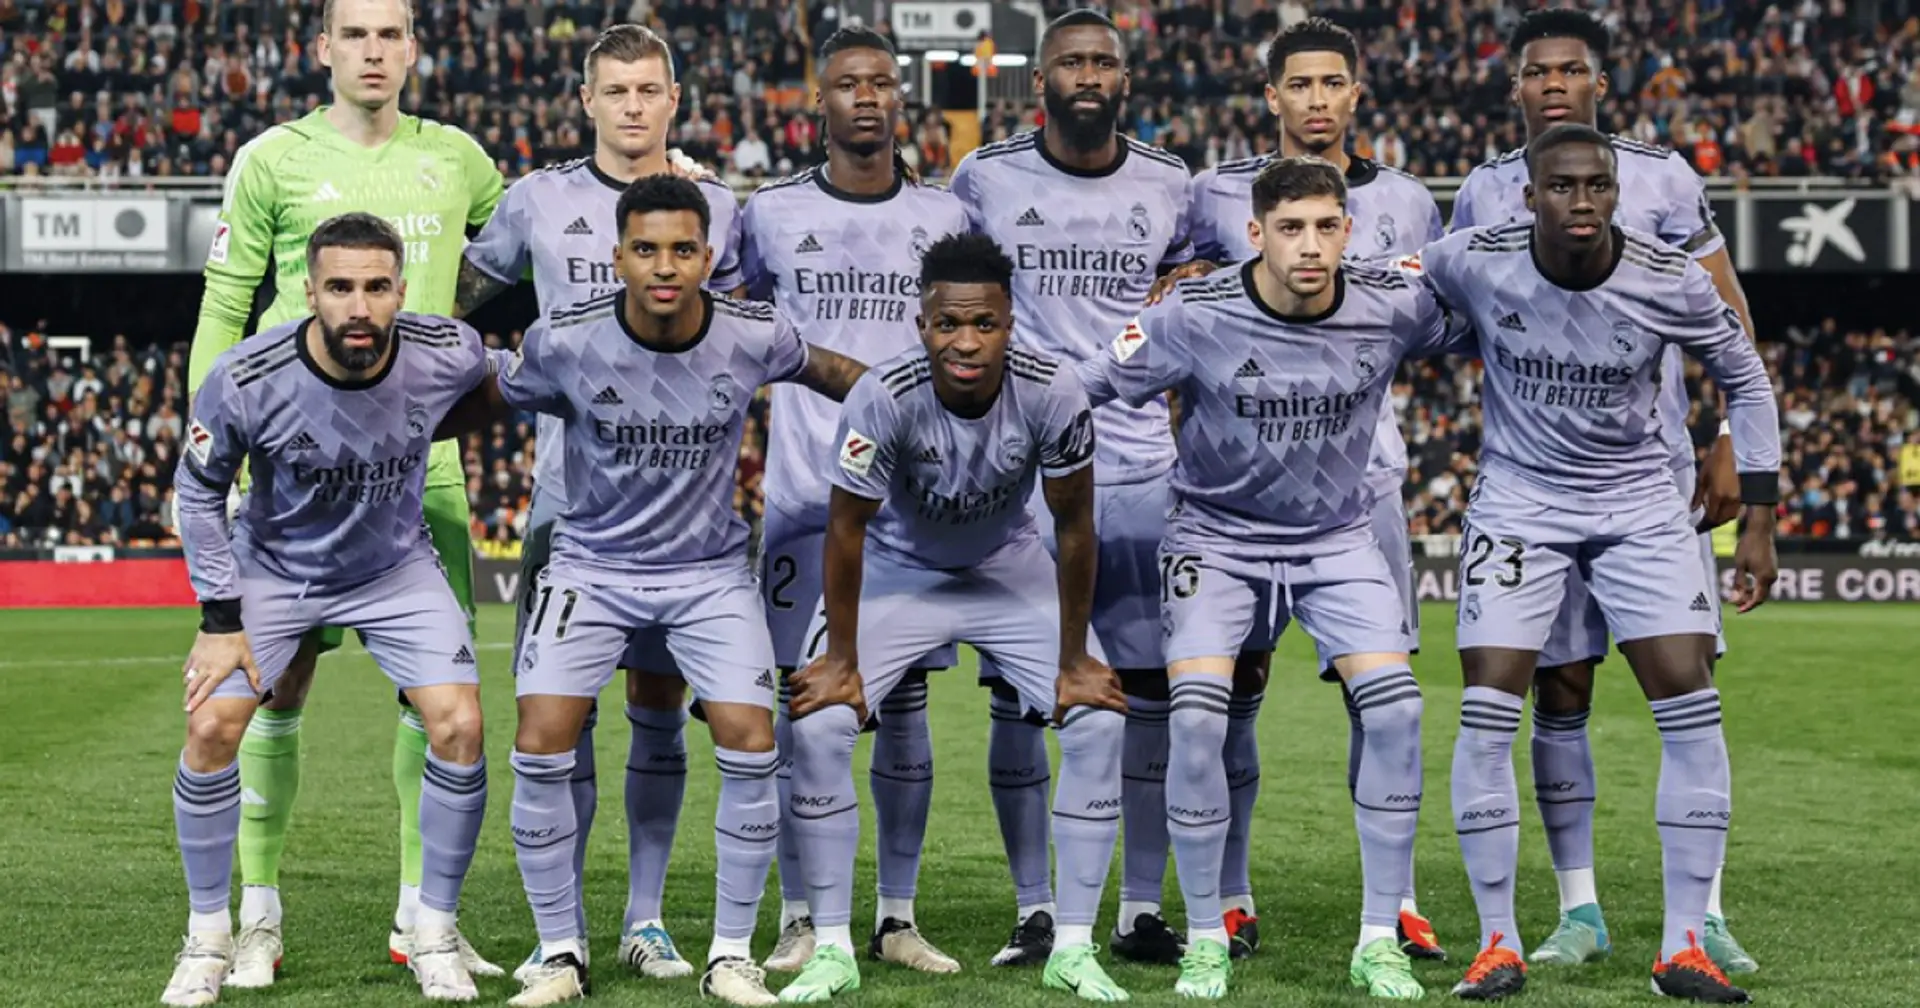 Tchouameni 8, Carvajal 4: rating Real Madrid players in Valencia draw